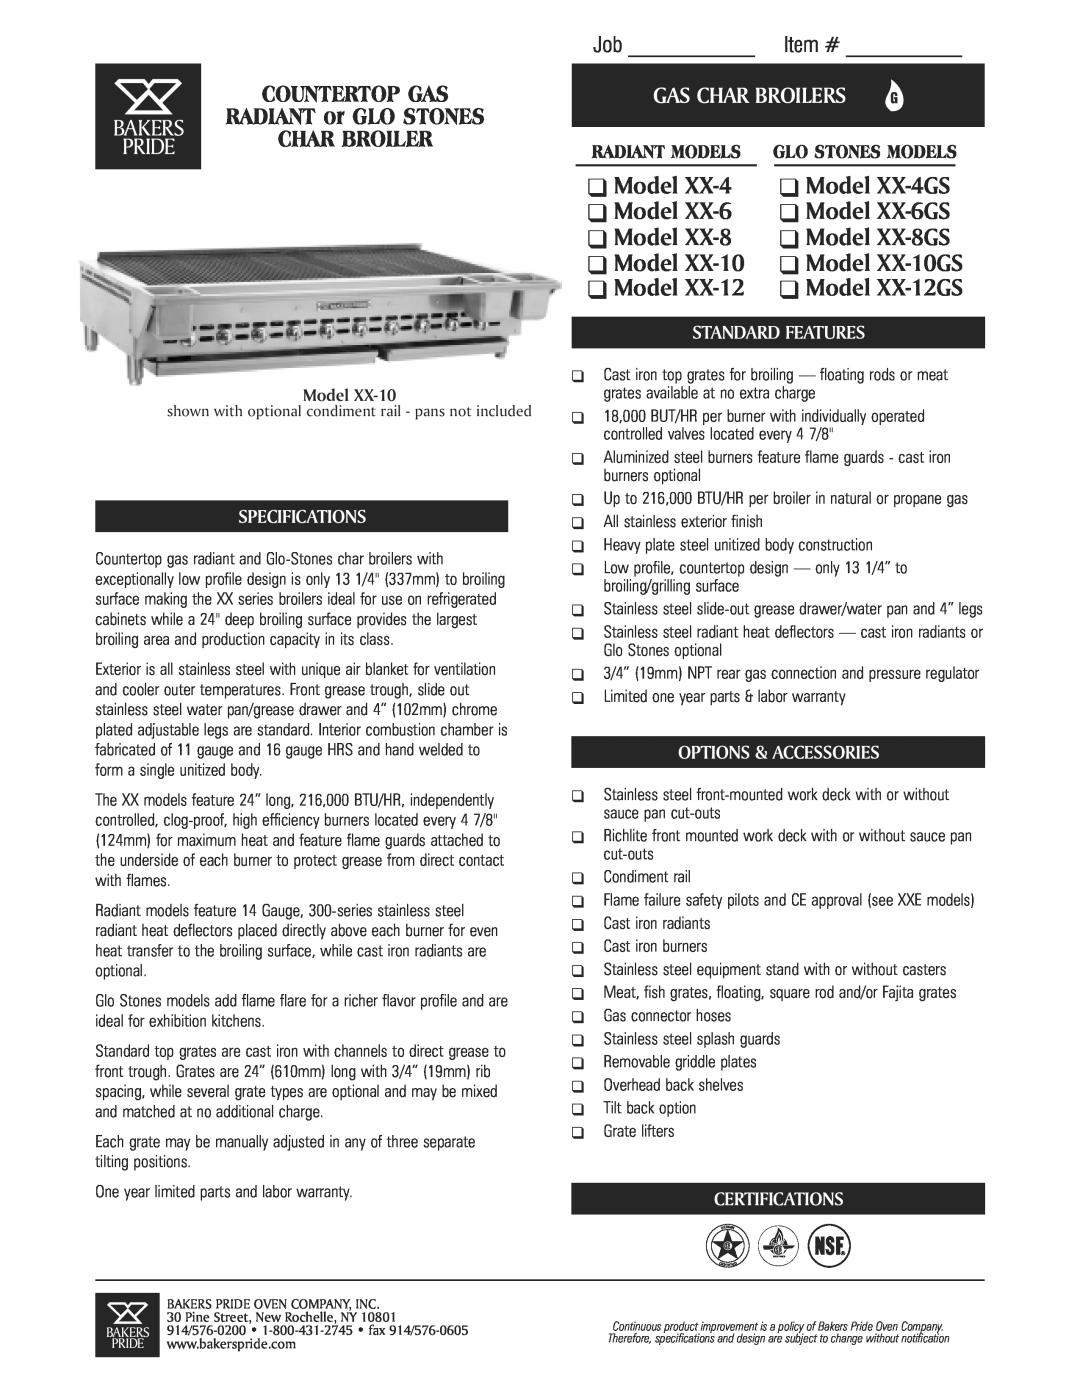 Bakers Pride Oven XX-12GS specifications Job Item #, RADIANT or GLO STONES, Char Broiler, Model XX-8 Model XX-8GS, Bakers 